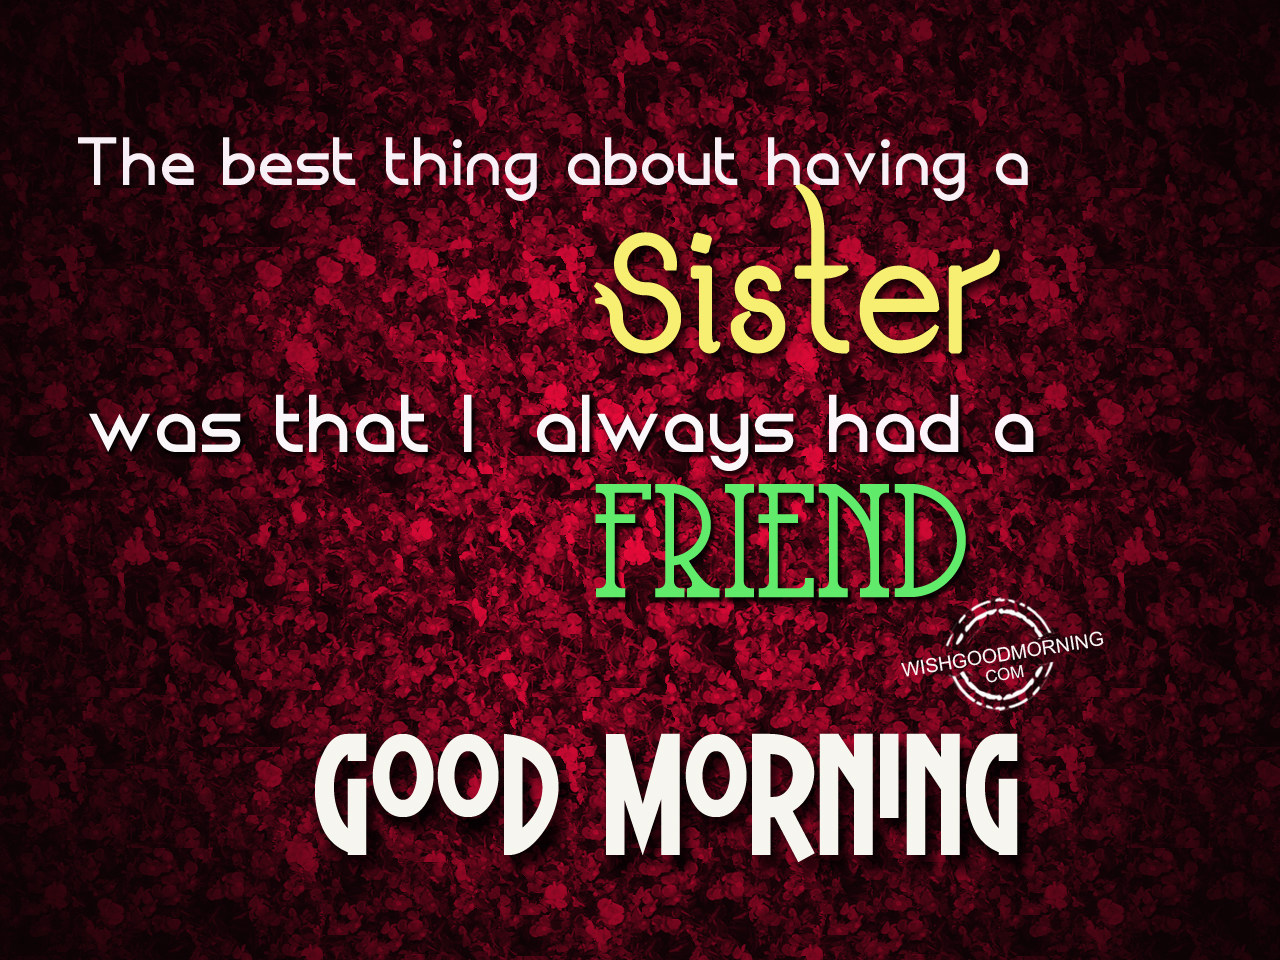 Good Morning Wishes For Sister - Good Morning Pictures ...